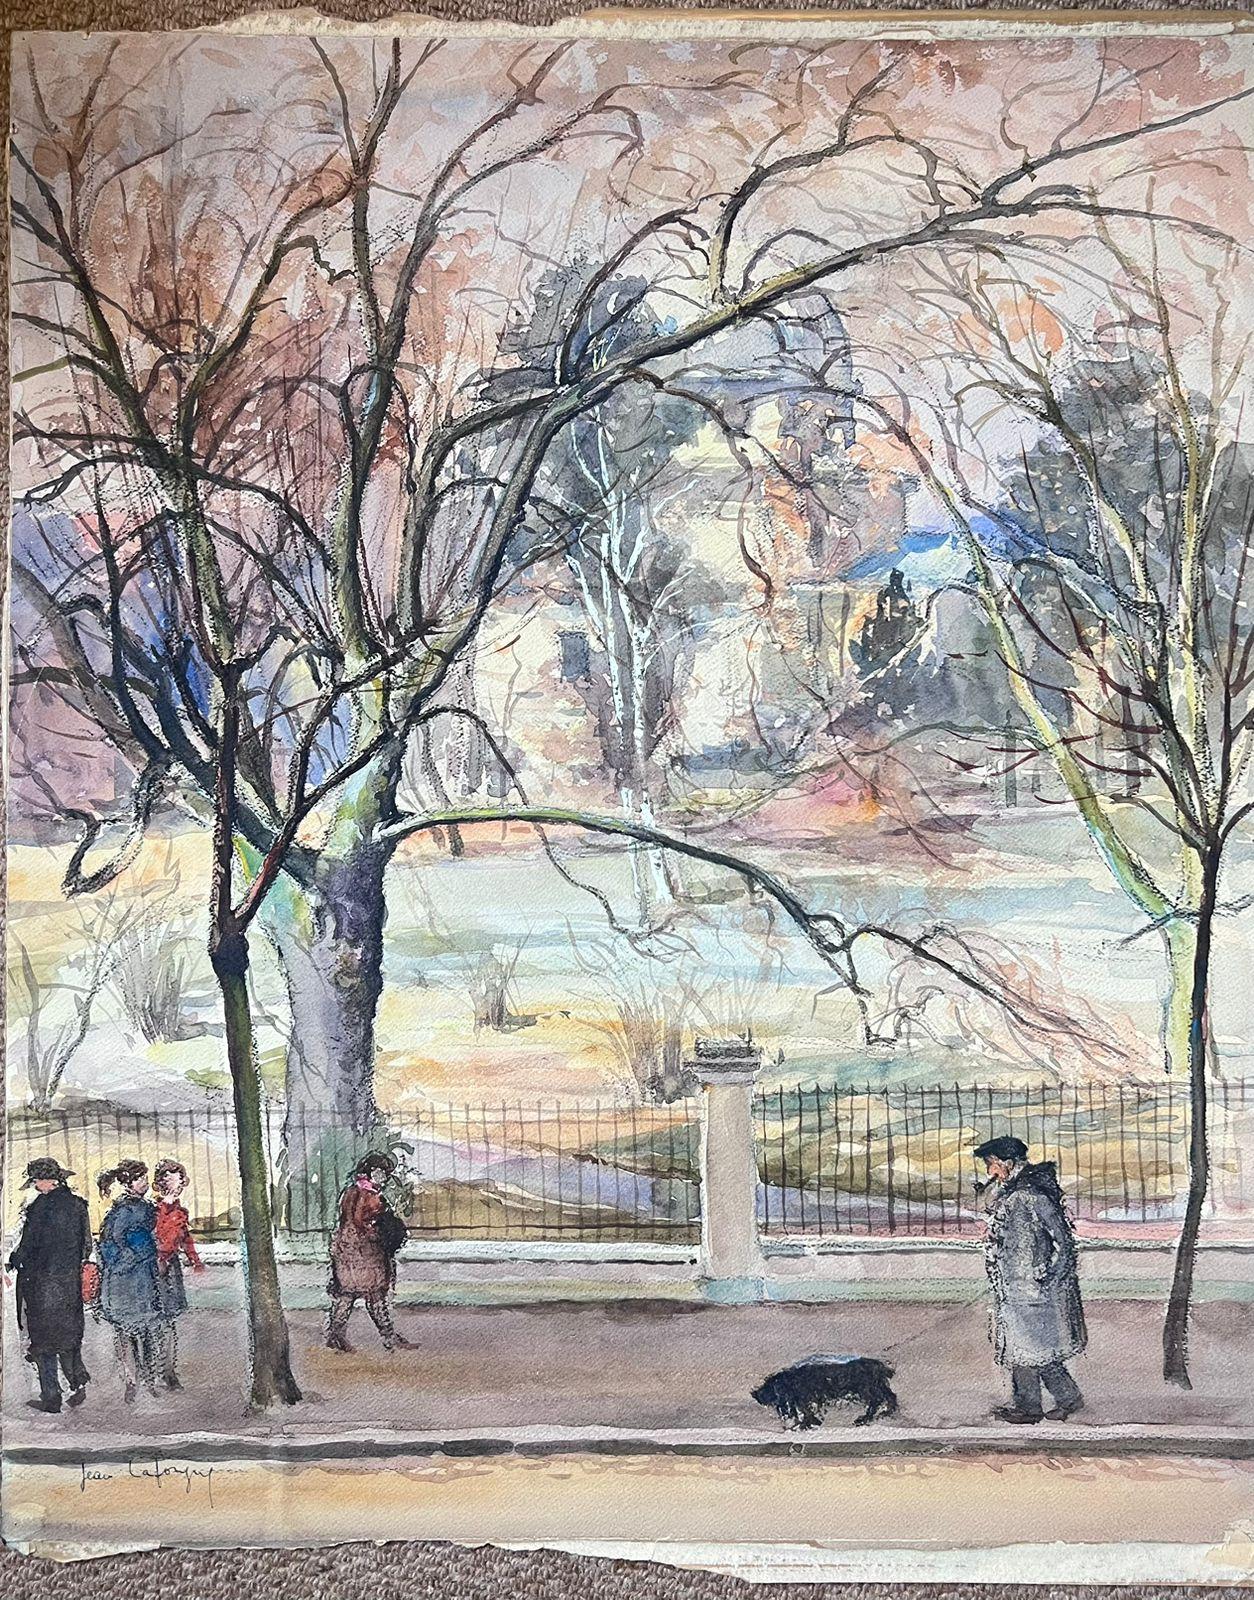 Jean La Forgue (French 1901-1975) signed watercolour on paper, unframed
painting: 22 x 18 inches
provenance: the artists estate, France
condition: very good and sound condition; there are minor age related marks and stains to the surface simply